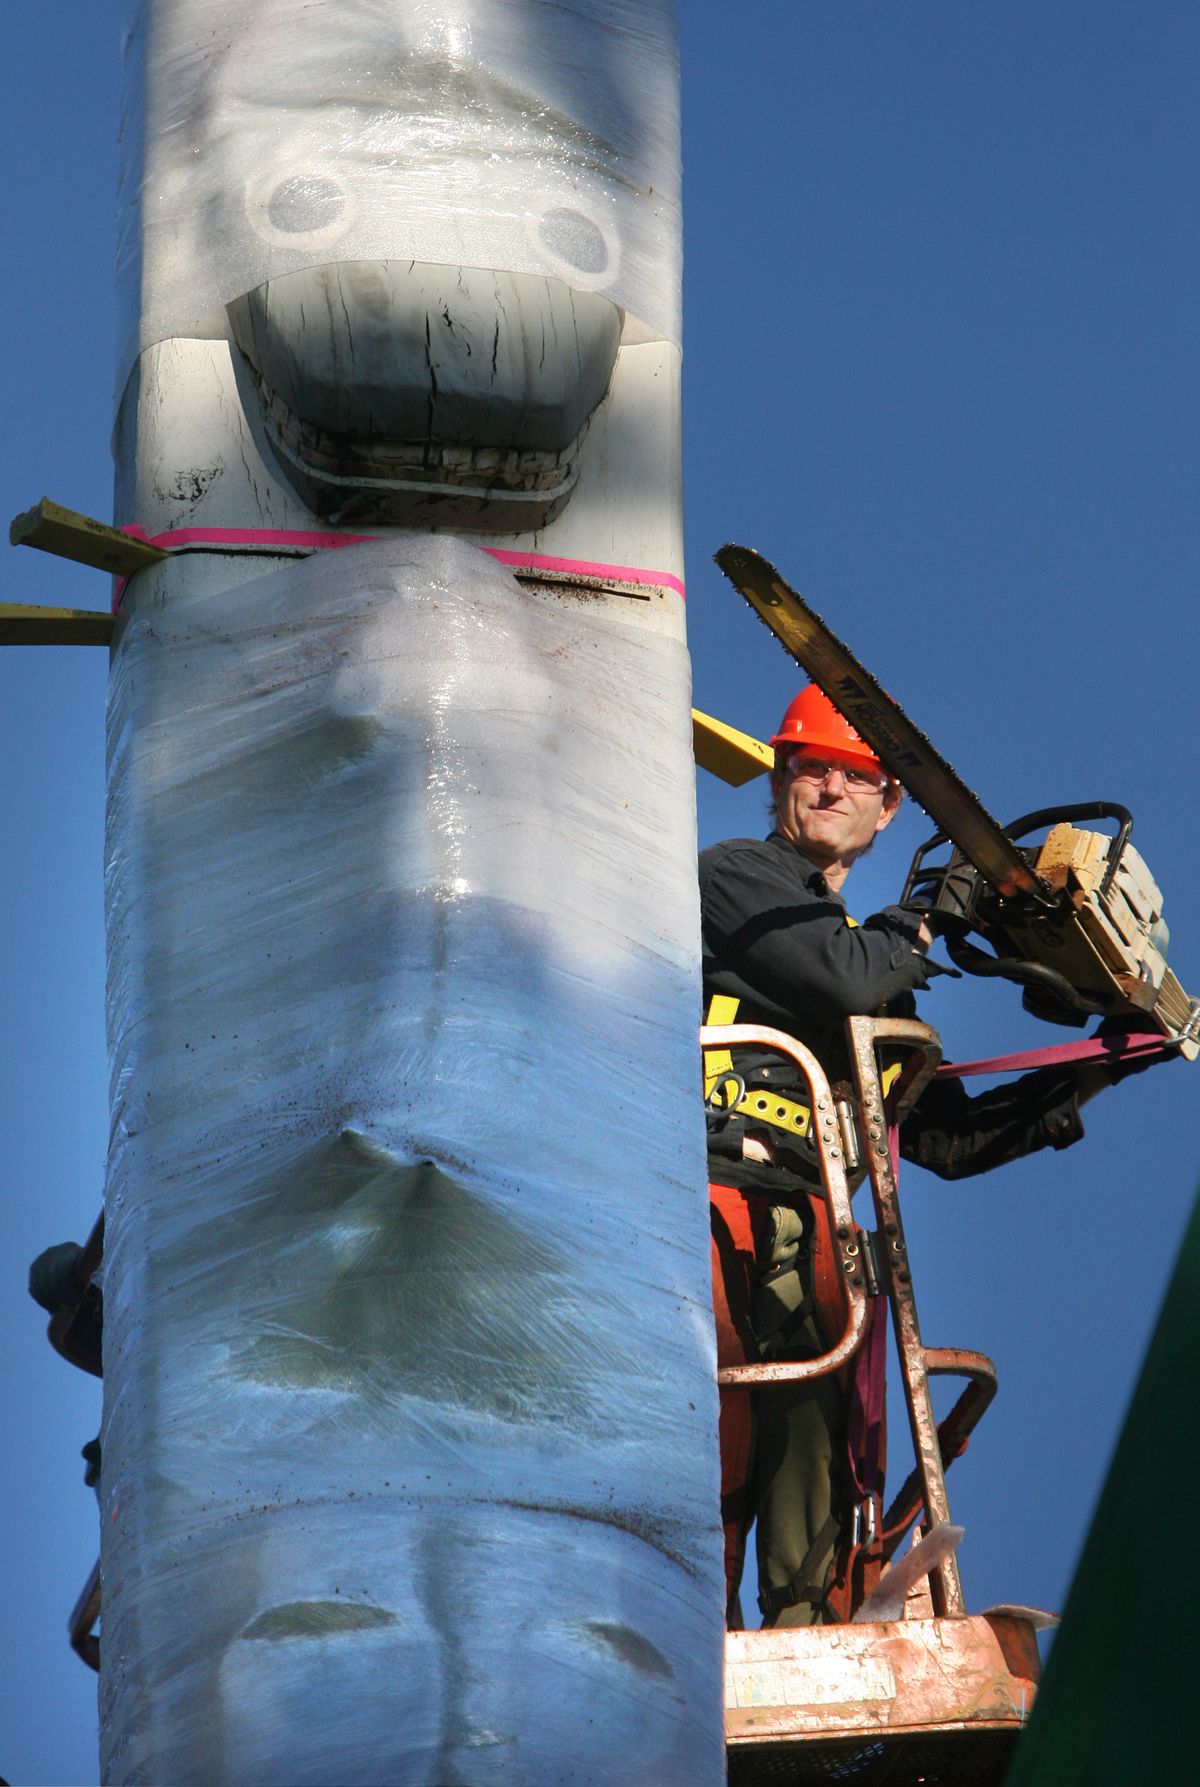  Mike Andersen, of Fabrication Specialties in Seattle, prepares to make a chain saw cut as crews remove the 71-foot-tall cedar Native American story pole on the Capitol Campus in Olympia on Wednesday. Rotting wood on the pole had created a safety hazard promoting its removal.  (Associated Press)